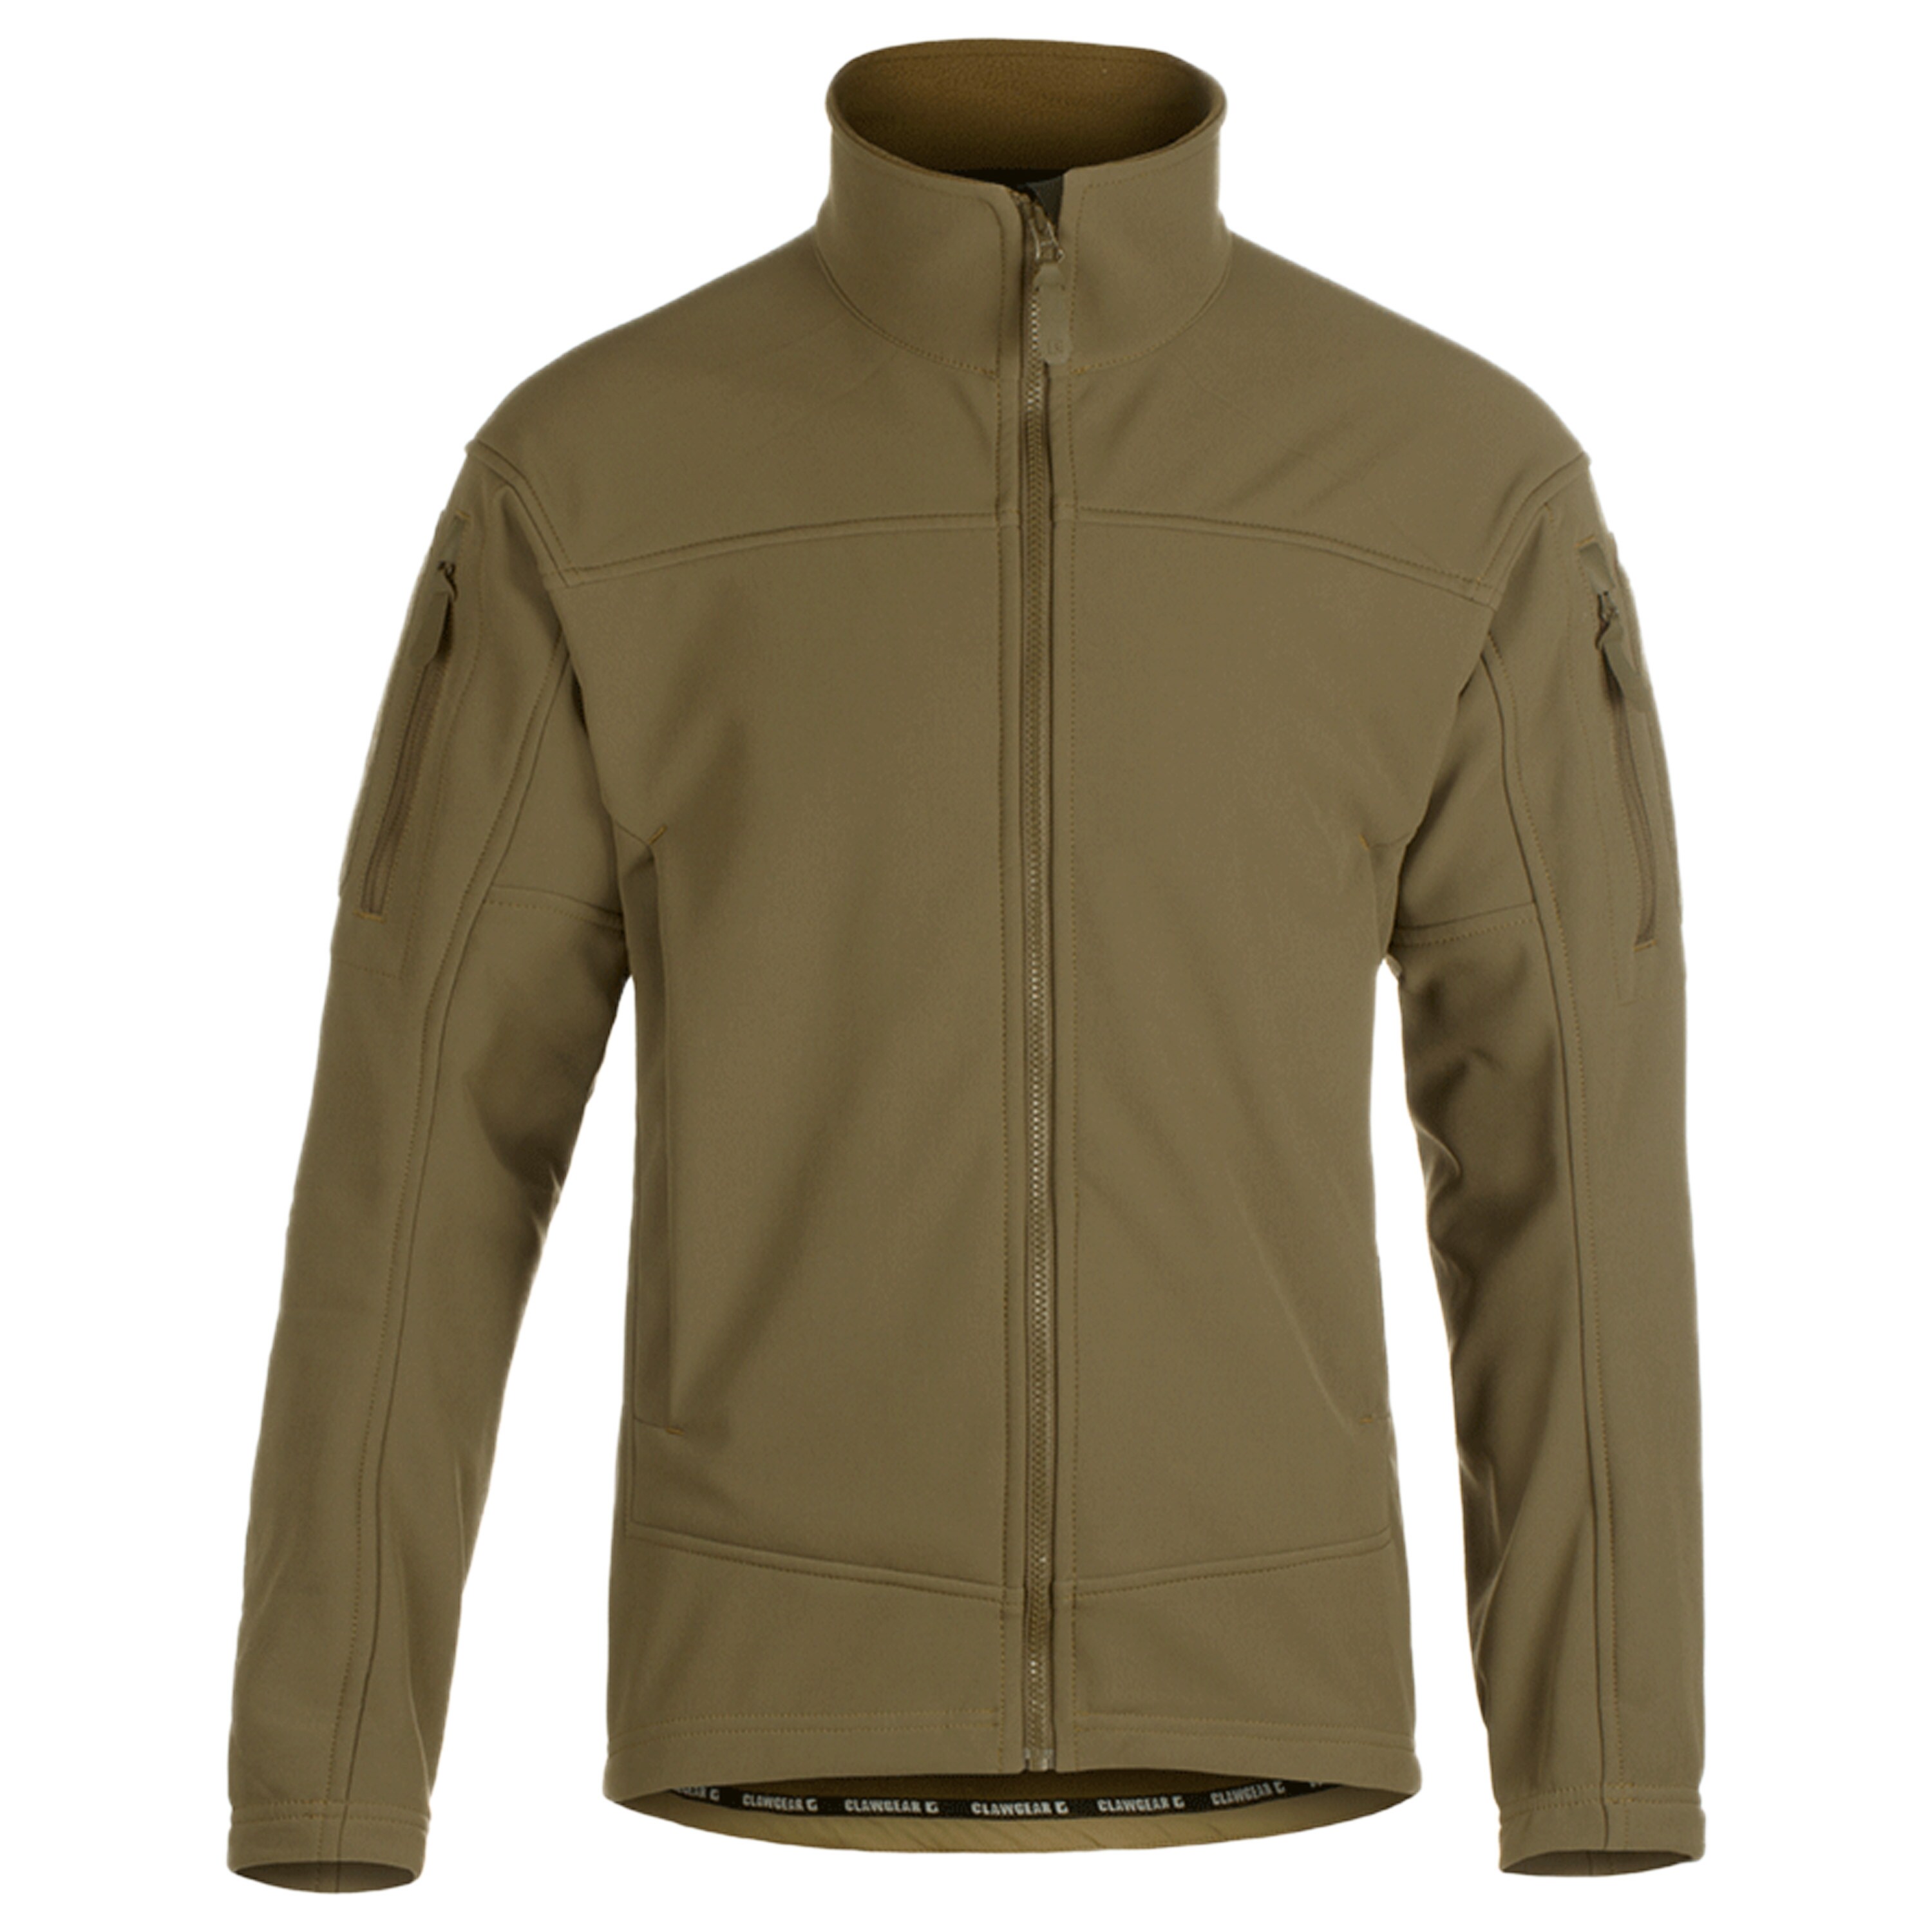 Purchase the Clawgear Jacket Audax Softshell swamp by ASMC